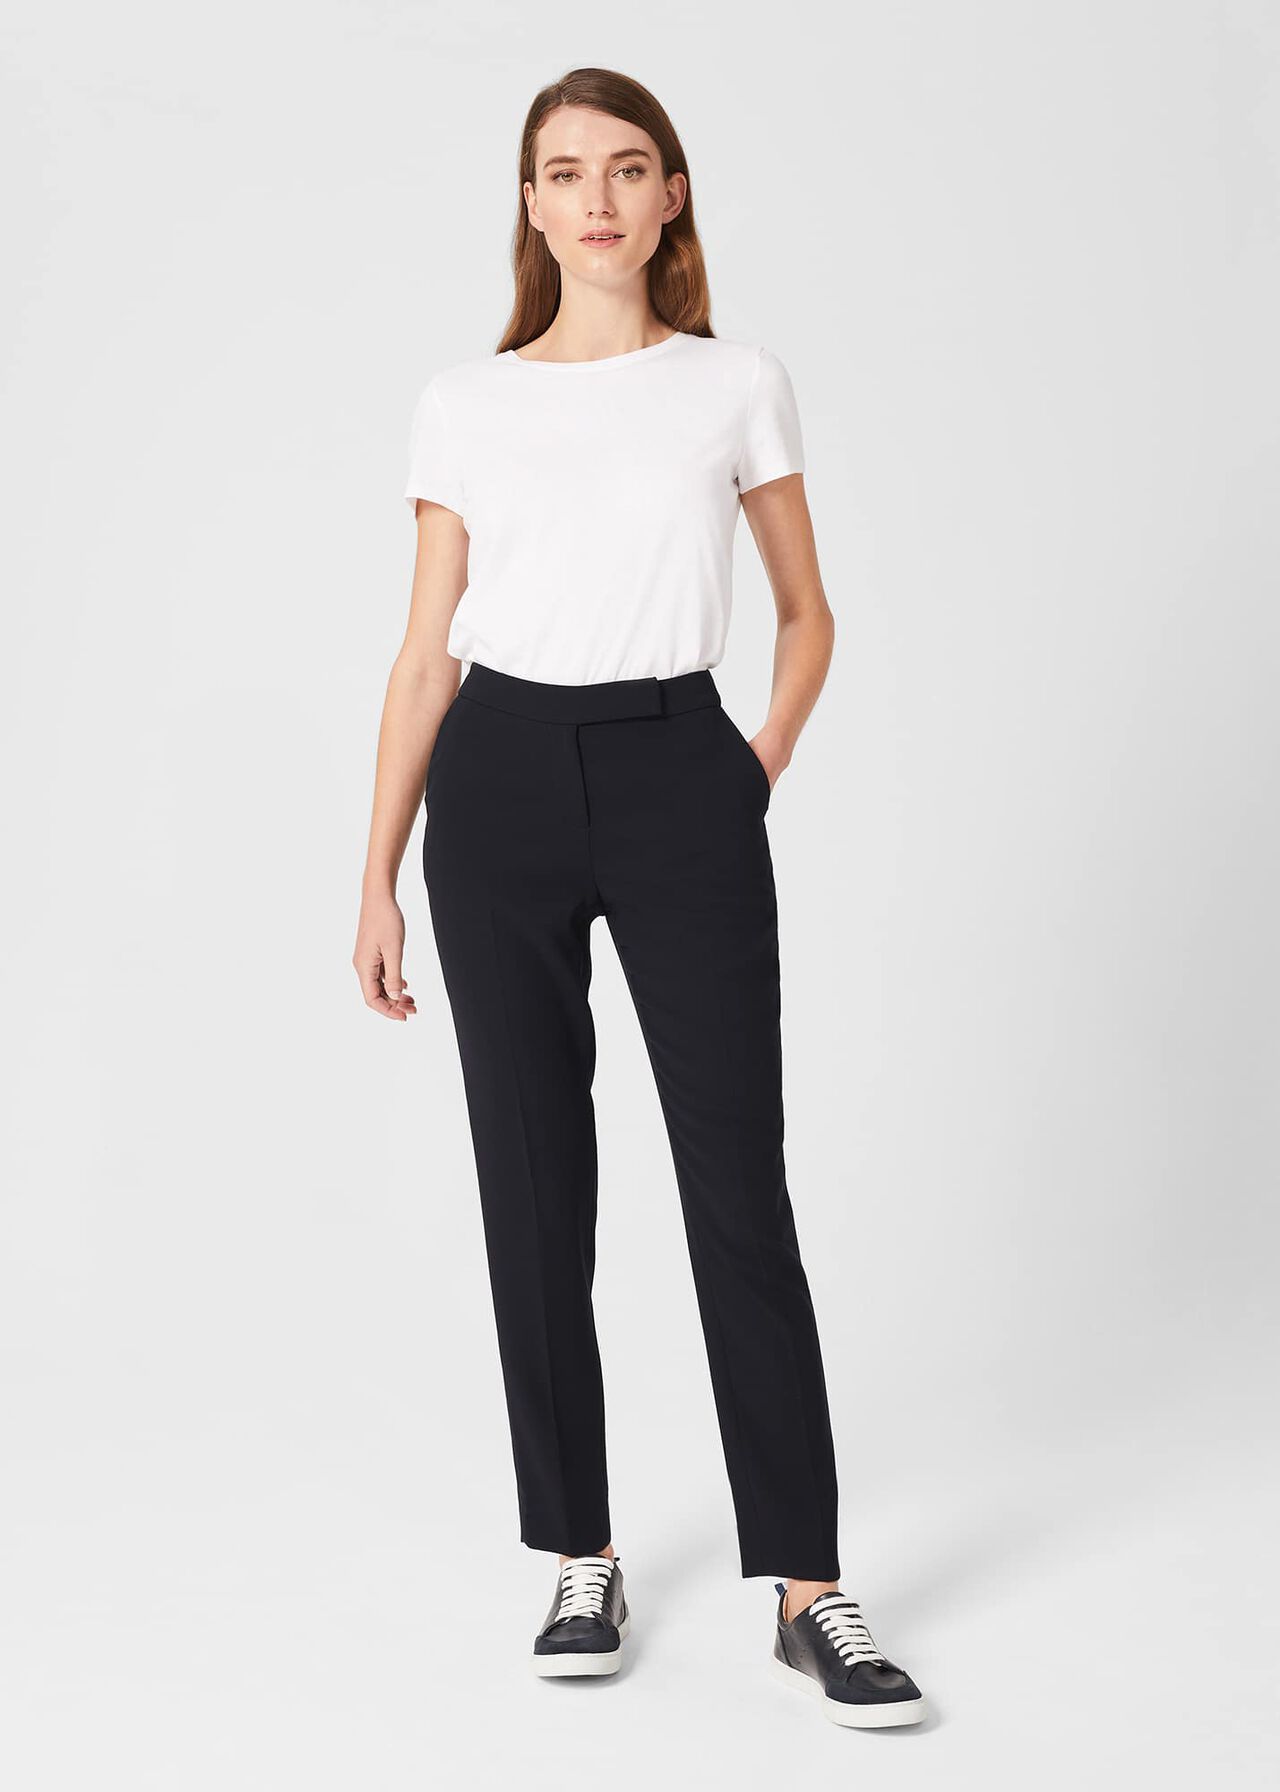 Tapered Pants for Women